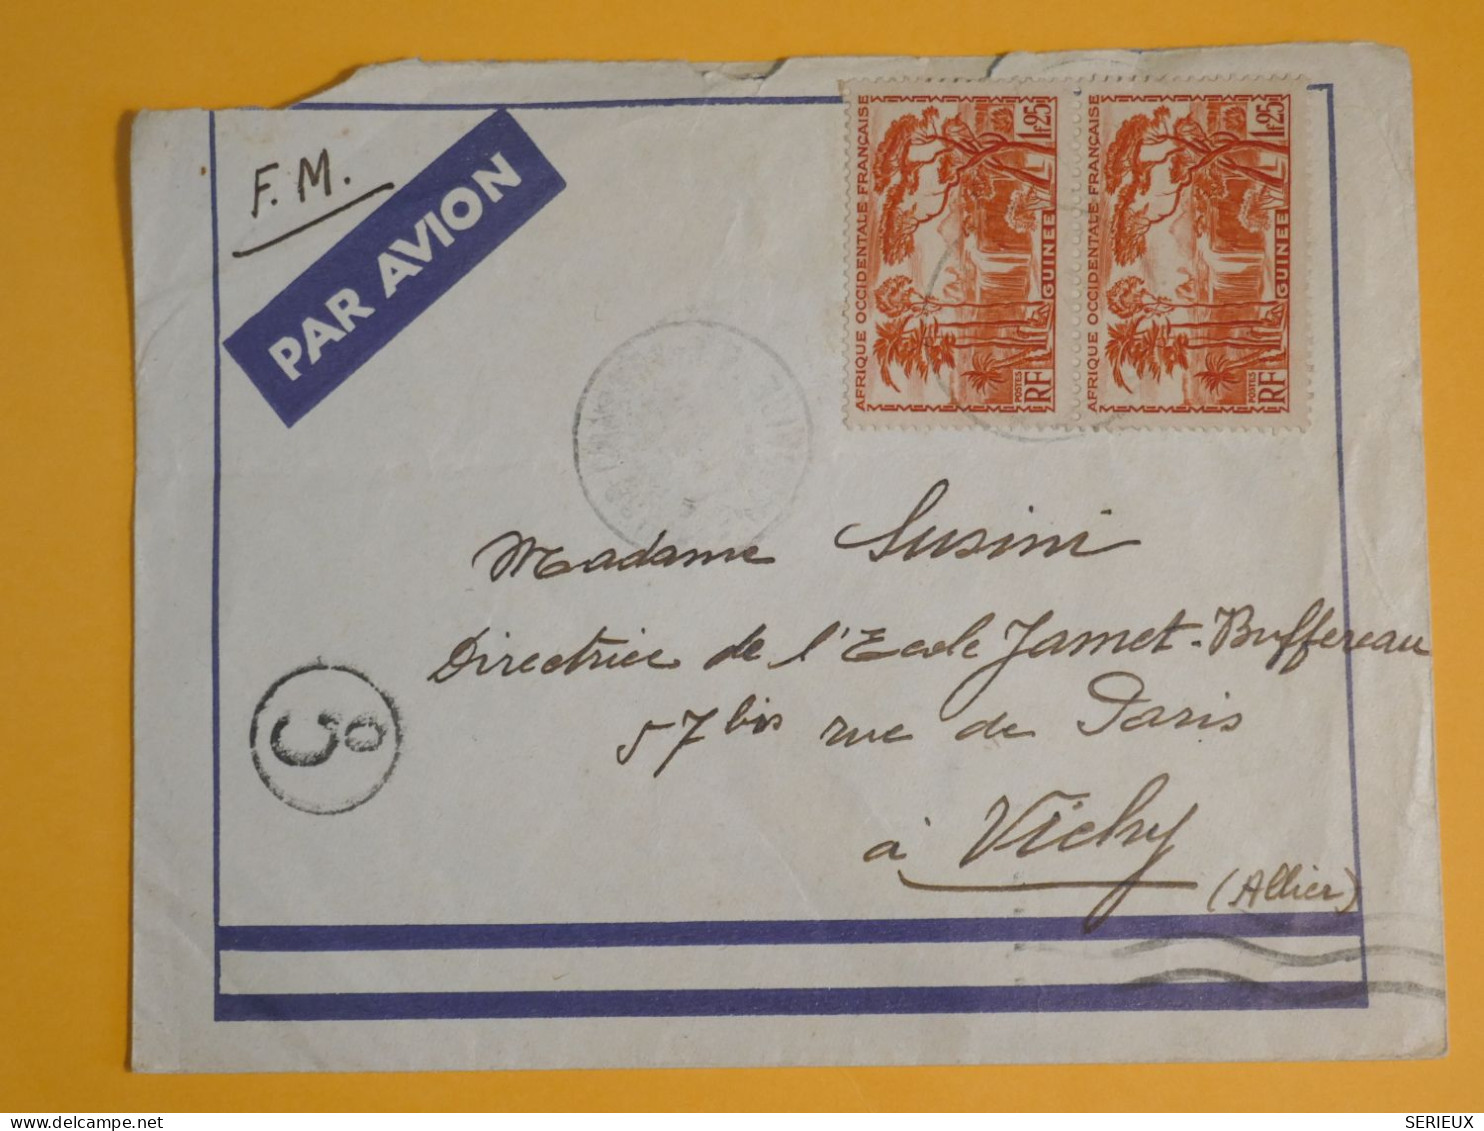 DM6 AOF  GUINEE  BELLE   LETTRE FM   1940 A VICHY FRANCE ++PAIRE N°164  + AFF.   INTERESSANT+ + - Covers & Documents